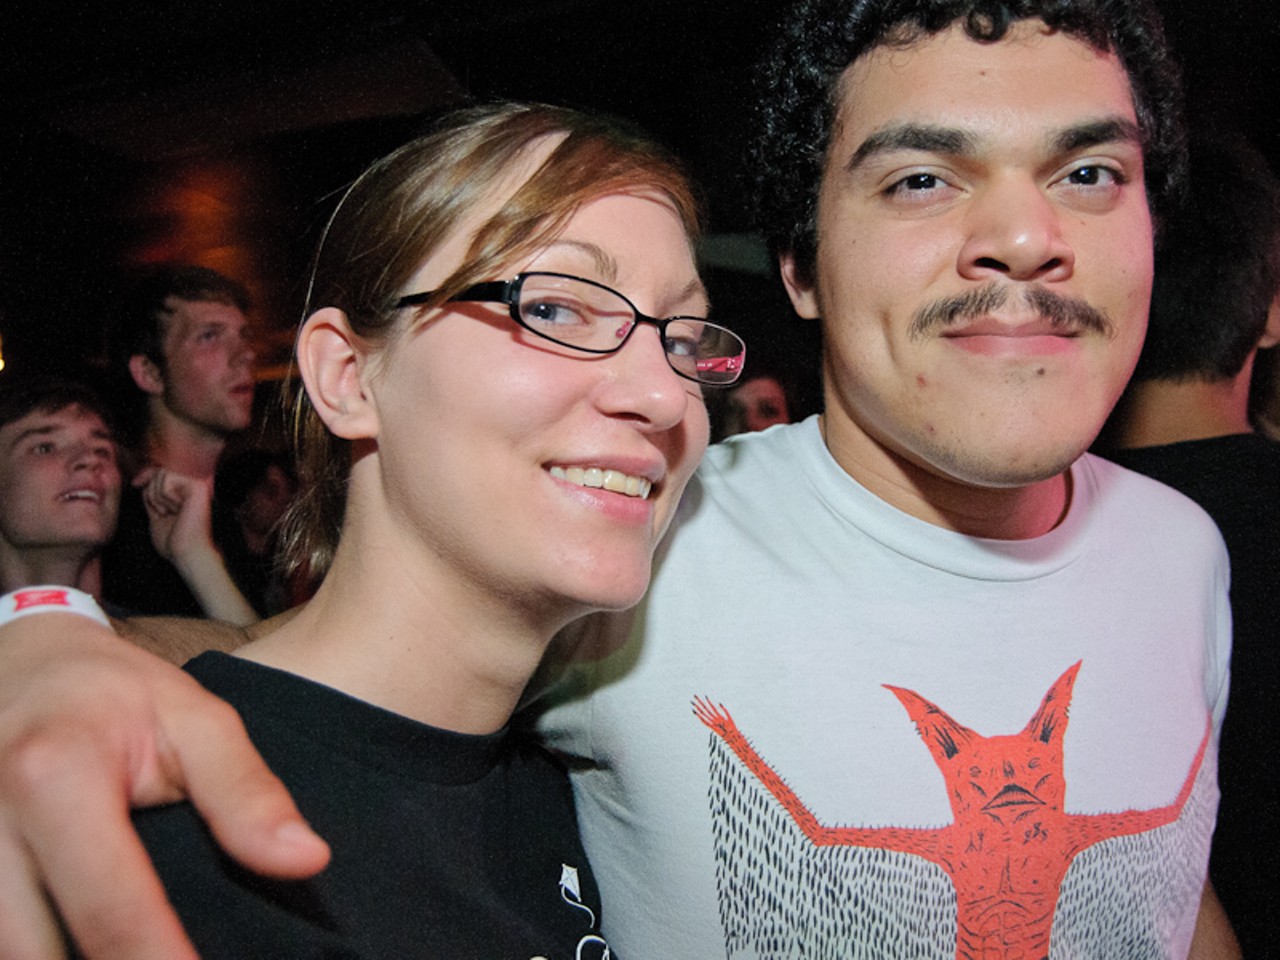 Not everyone was in attendance just for the headliners - this couple was just as excited about Toro y Moi.